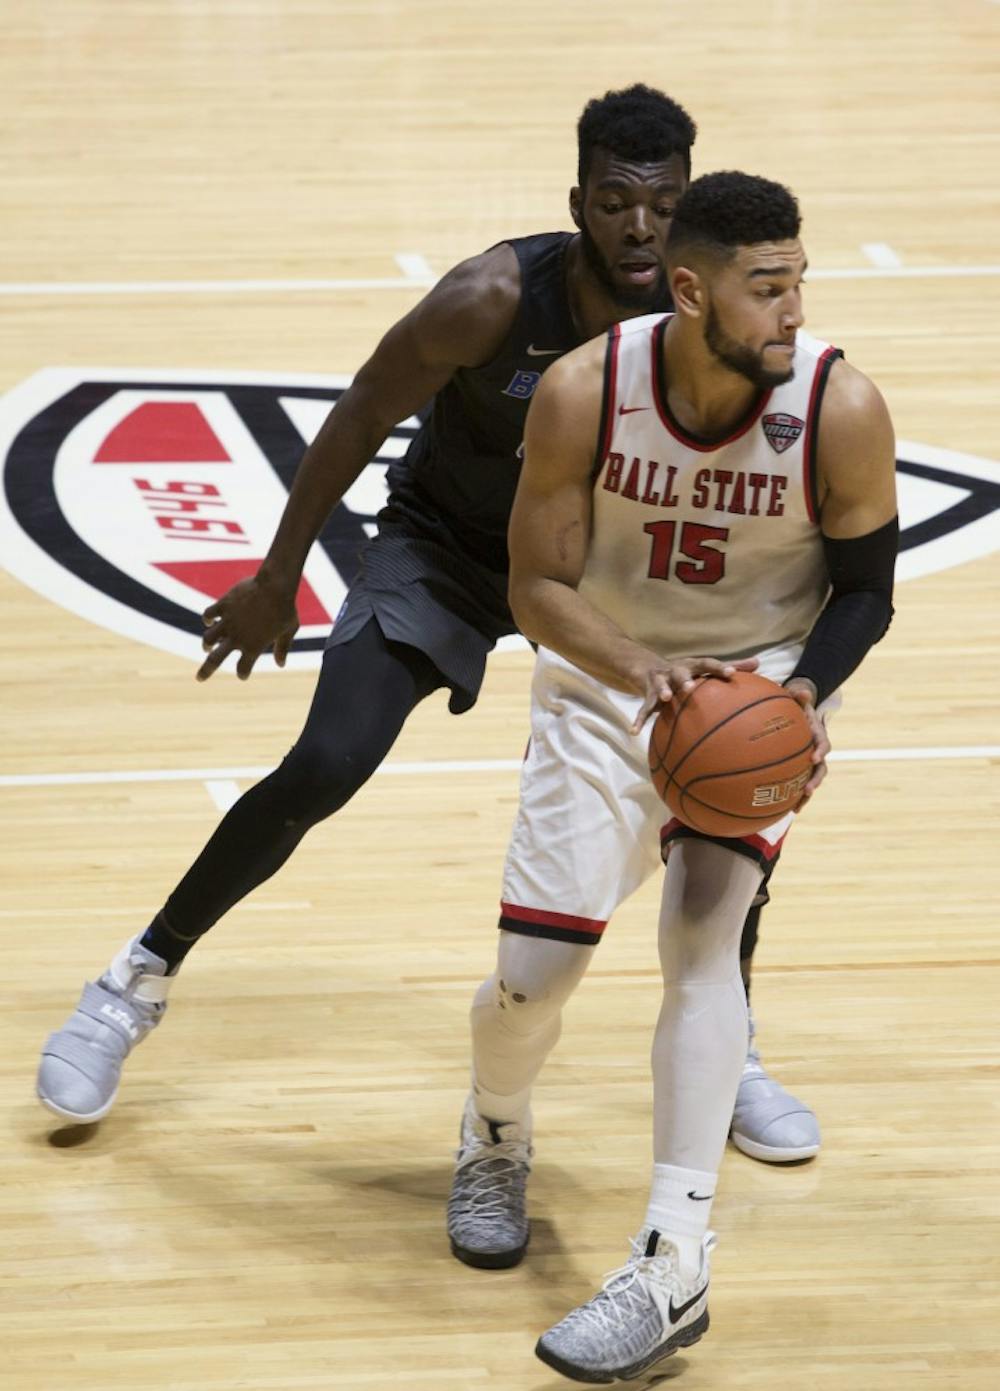 Ball State men's basketball suffers worst home loss since 2013